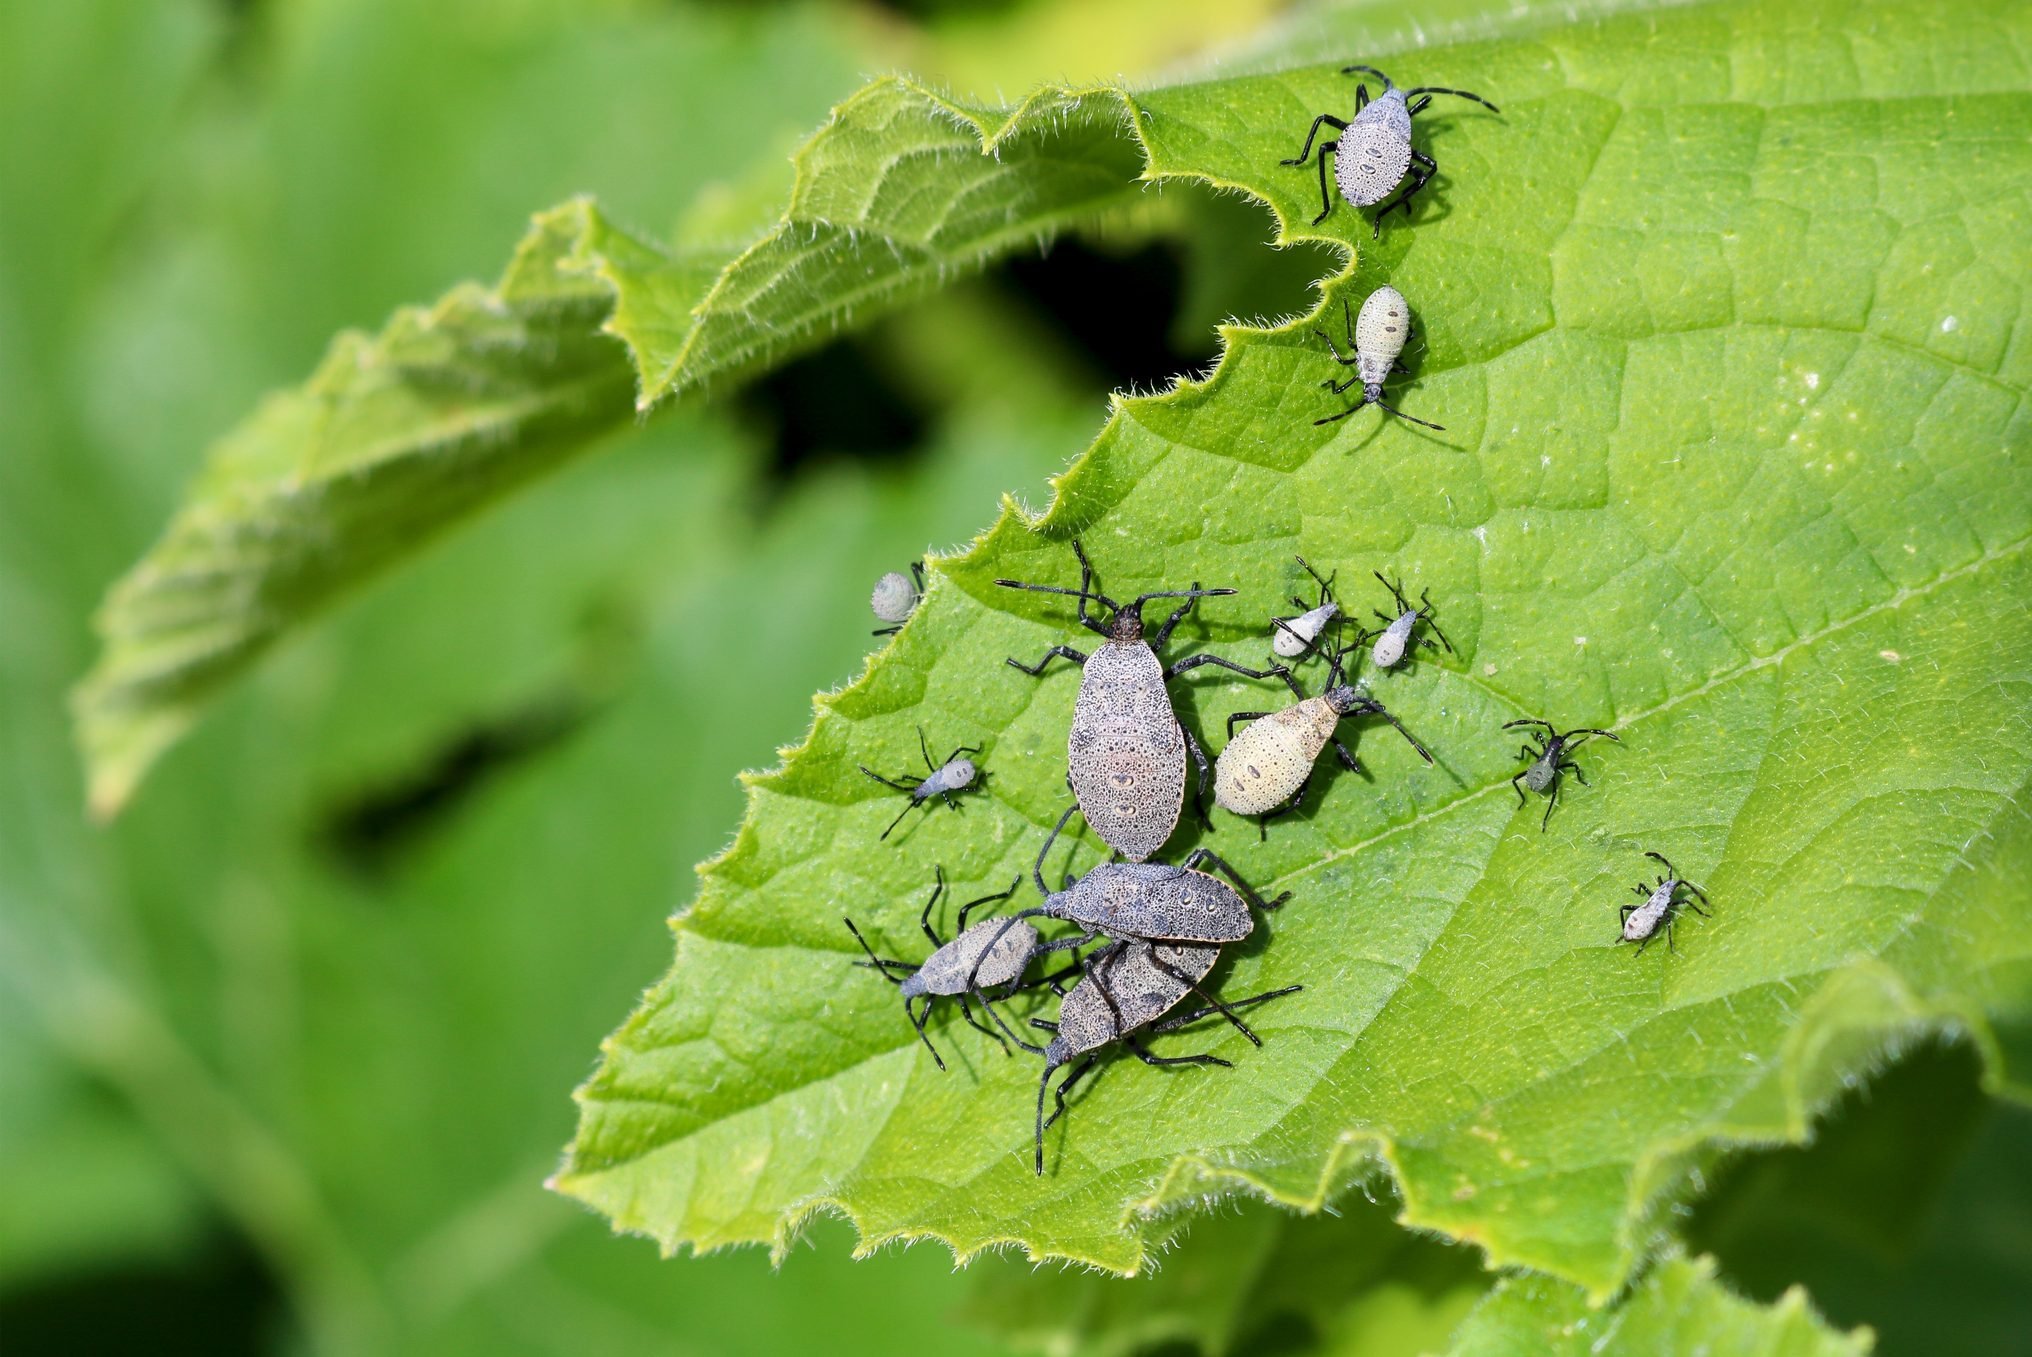 Here's How To Keep Squash Bugs Out of Your Garden